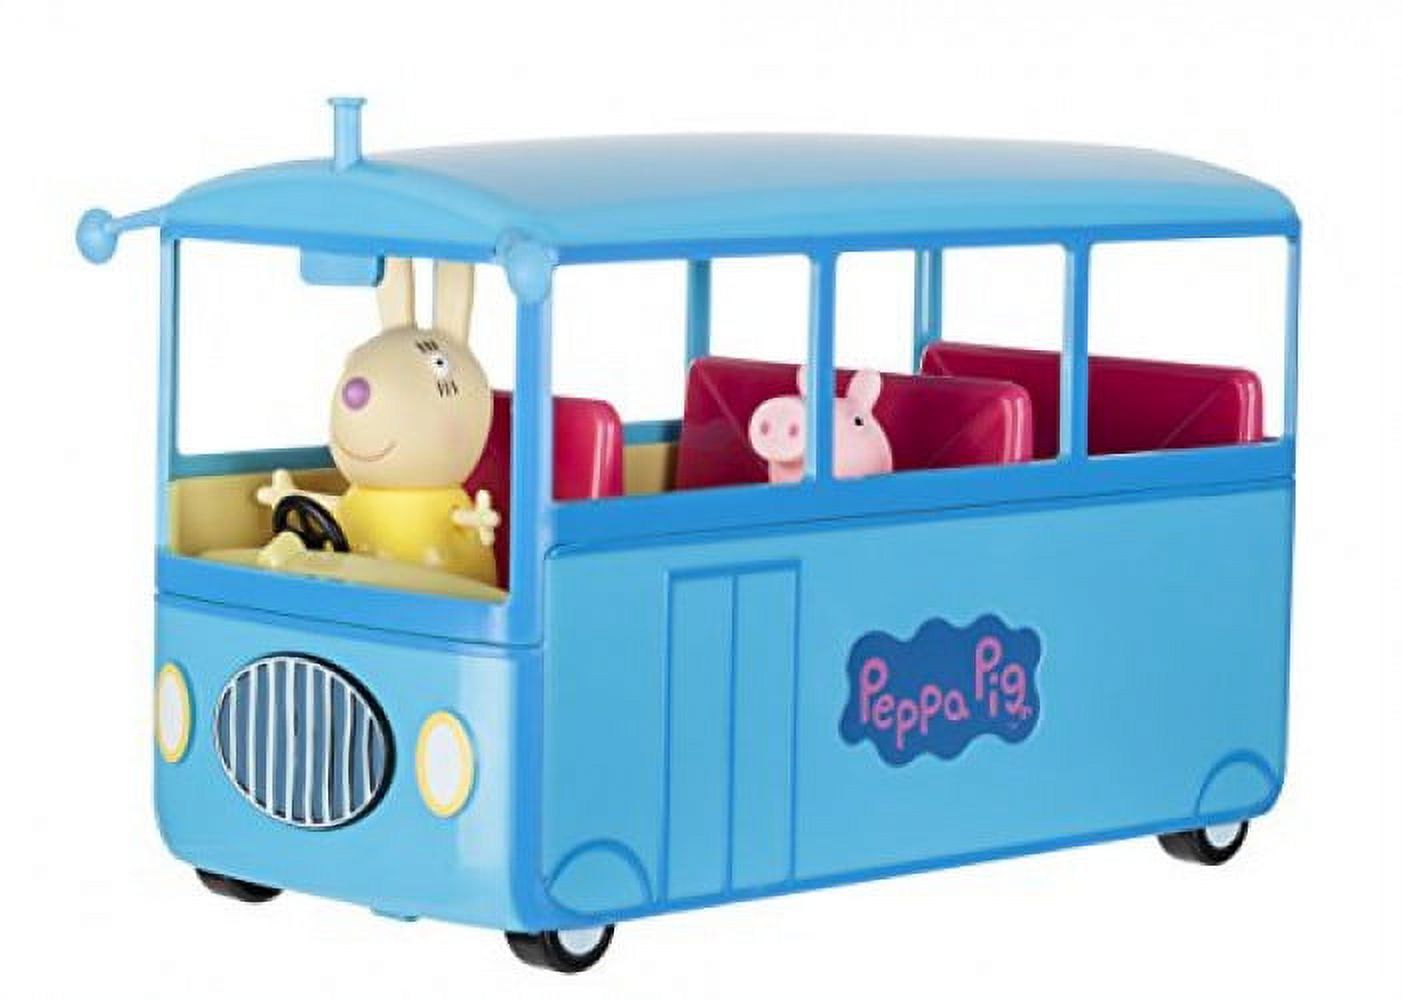 School bus with 5 seats, removable roof and songs. Press the front grill of the bus to activate sound. Includes 2 figures Peppa Pig and Miss Rabbit. - image 1 of 2